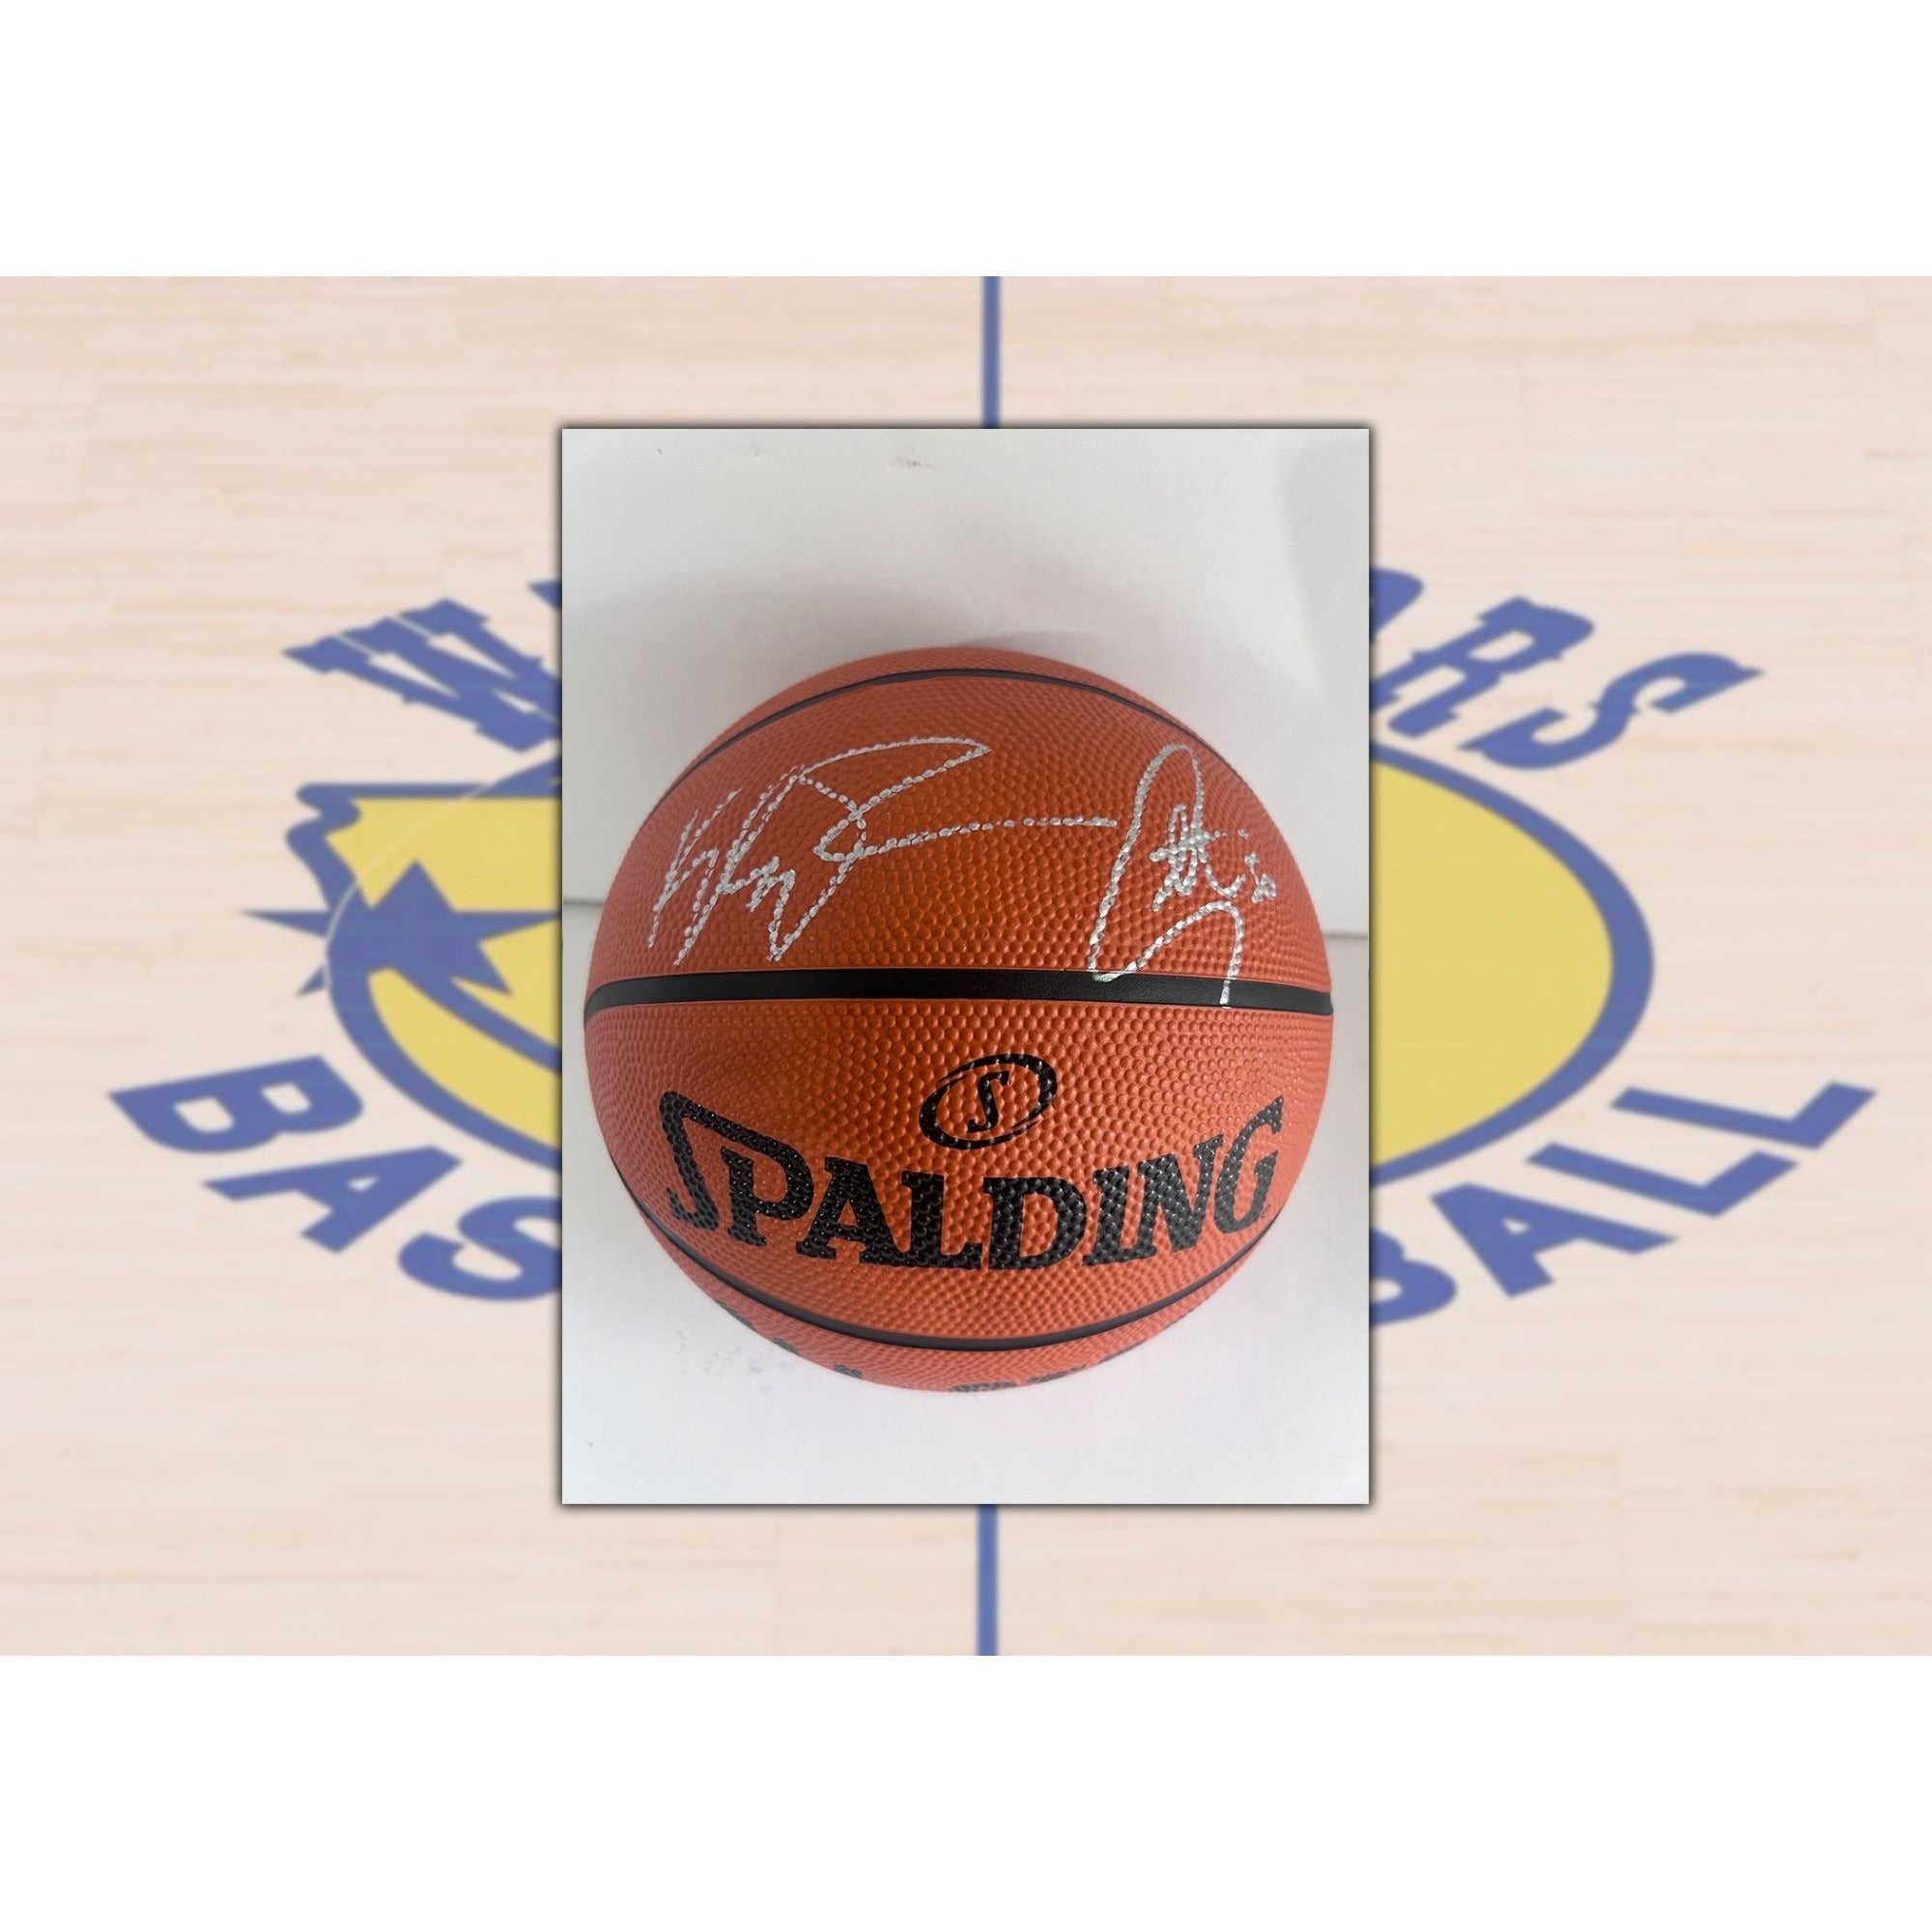 Stephen Curry, Klay Thompson Golden State Warriors Spalding NBA full size basketball signed with proof